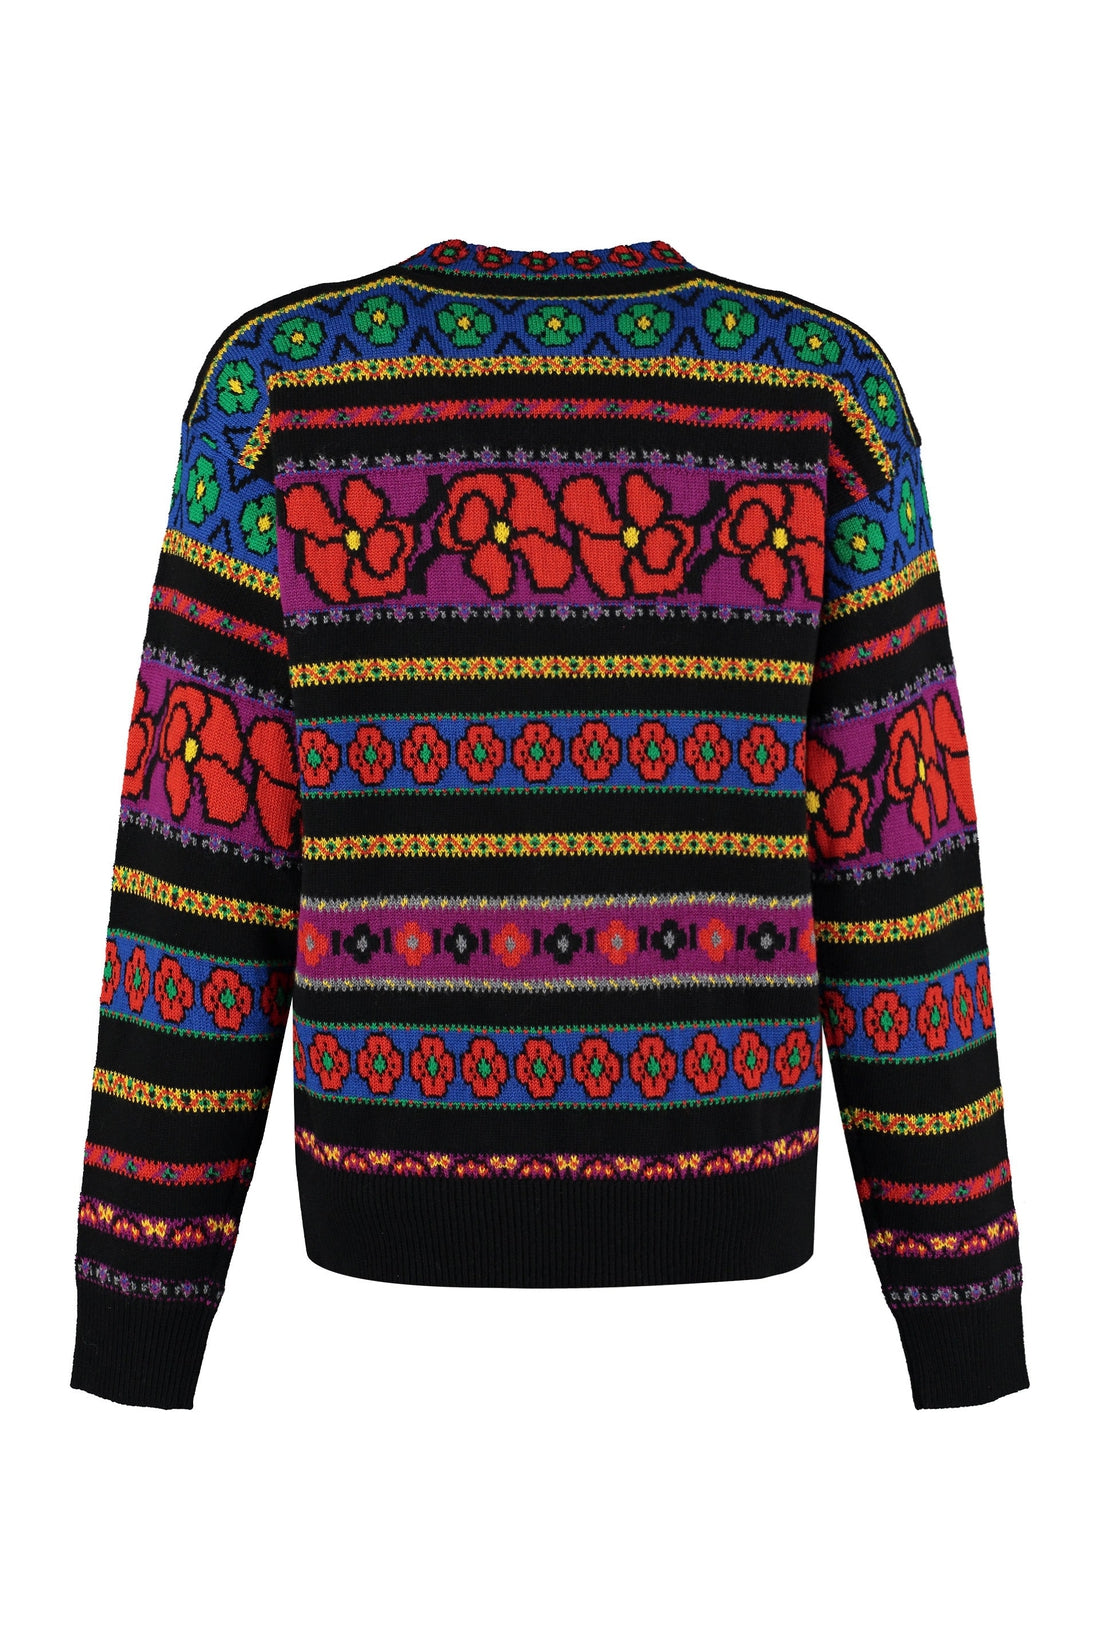 Kenzo-OUTLET-SALE-Crew-neck wool sweater-ARCHIVIST